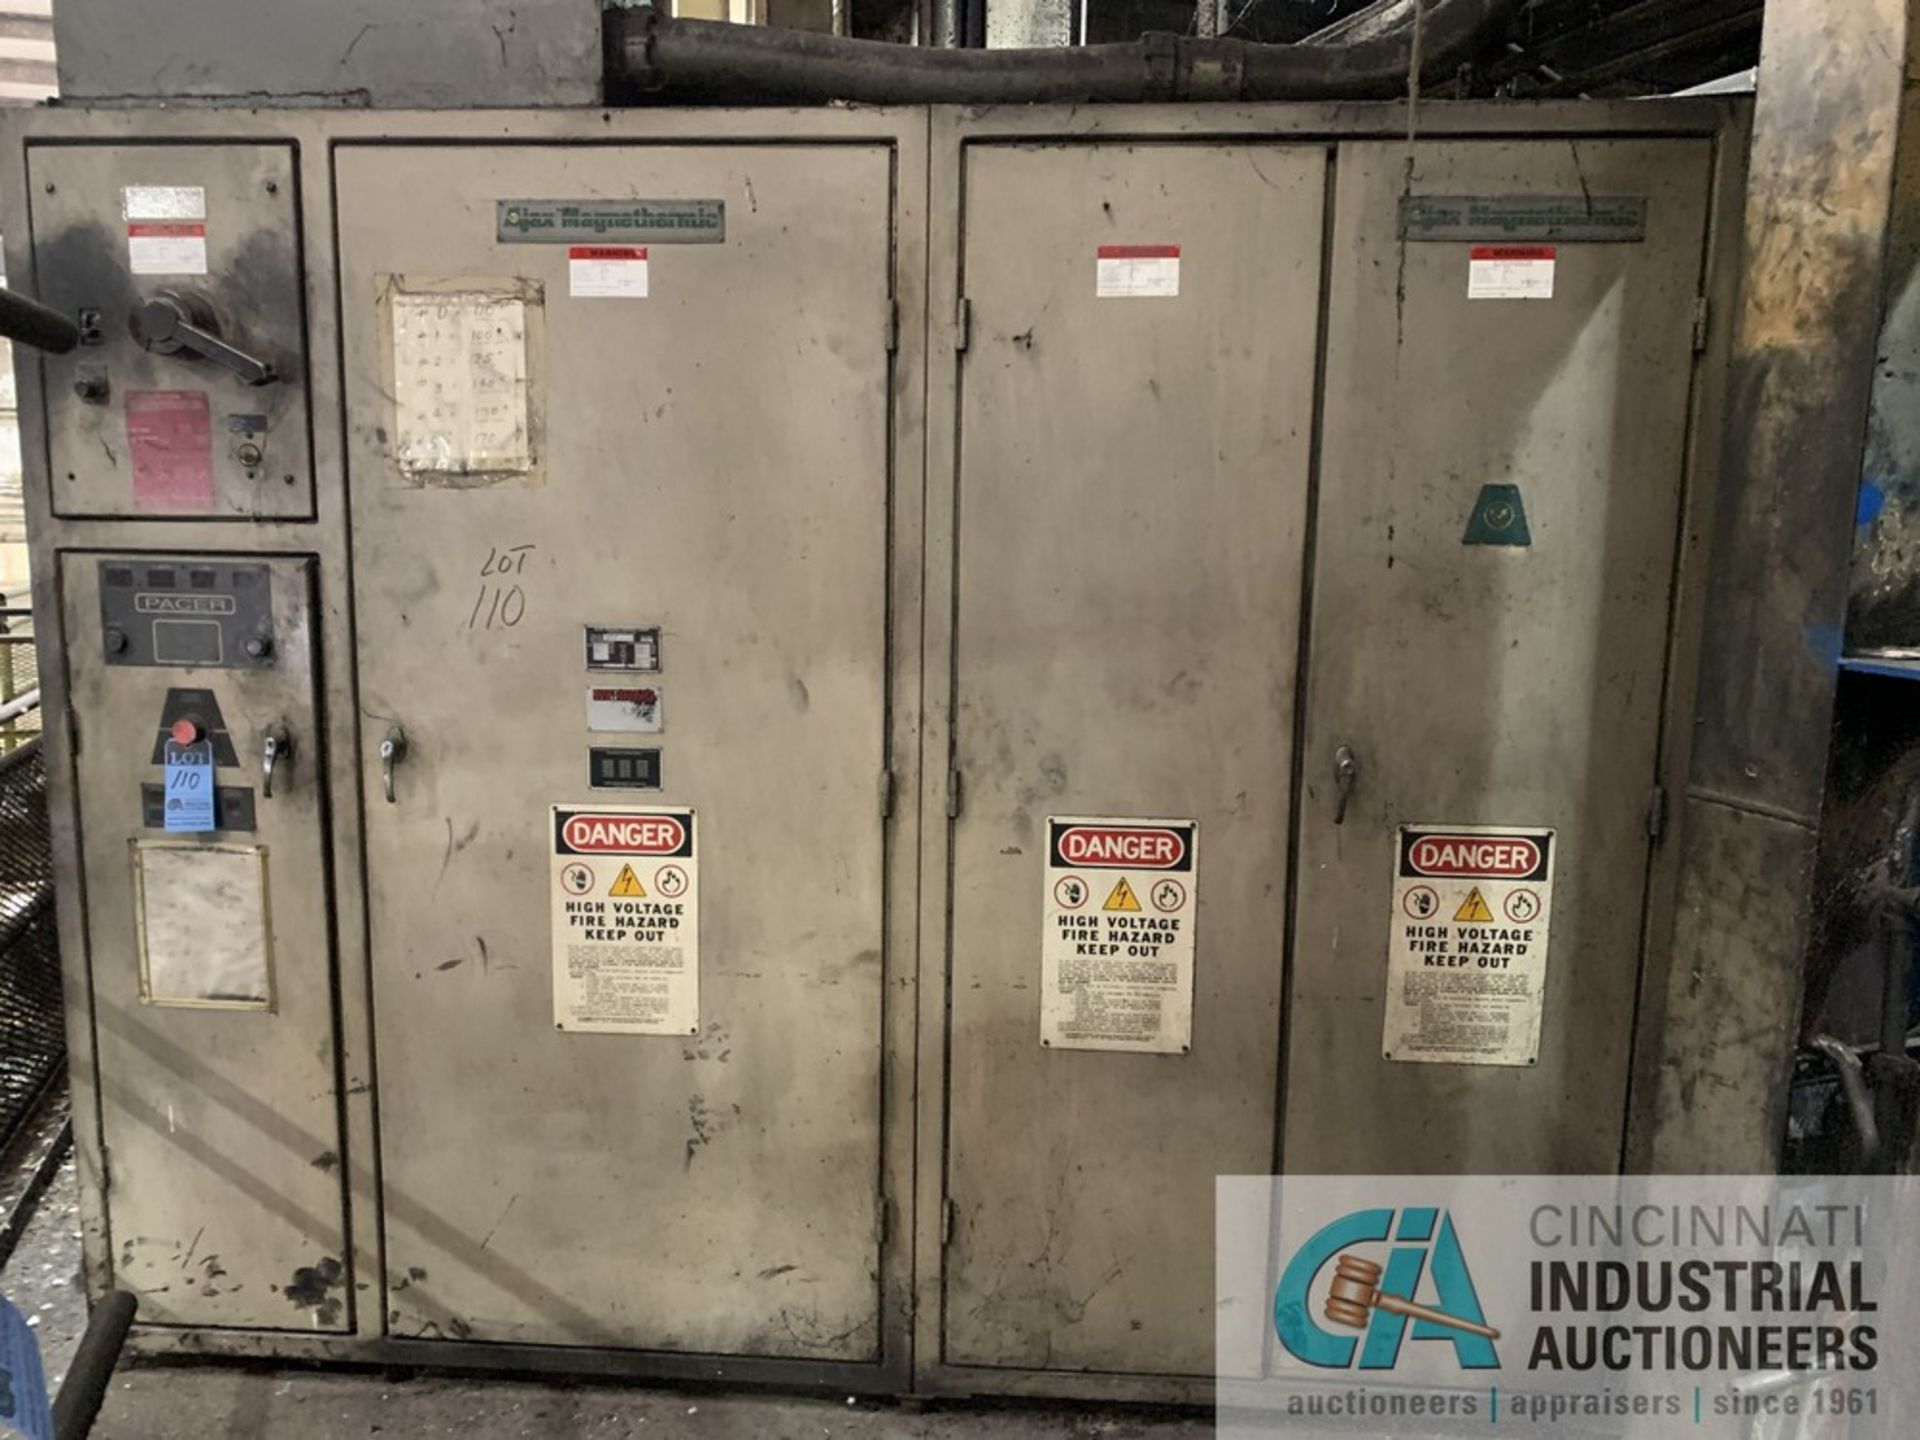 750 KW AJAX MAGNETHERMIC PACER II INDUCTION HEAT POWER SUPPLY; S/N H2K560B, 1,250 VOLT, 12,875 KVA - Image 2 of 6